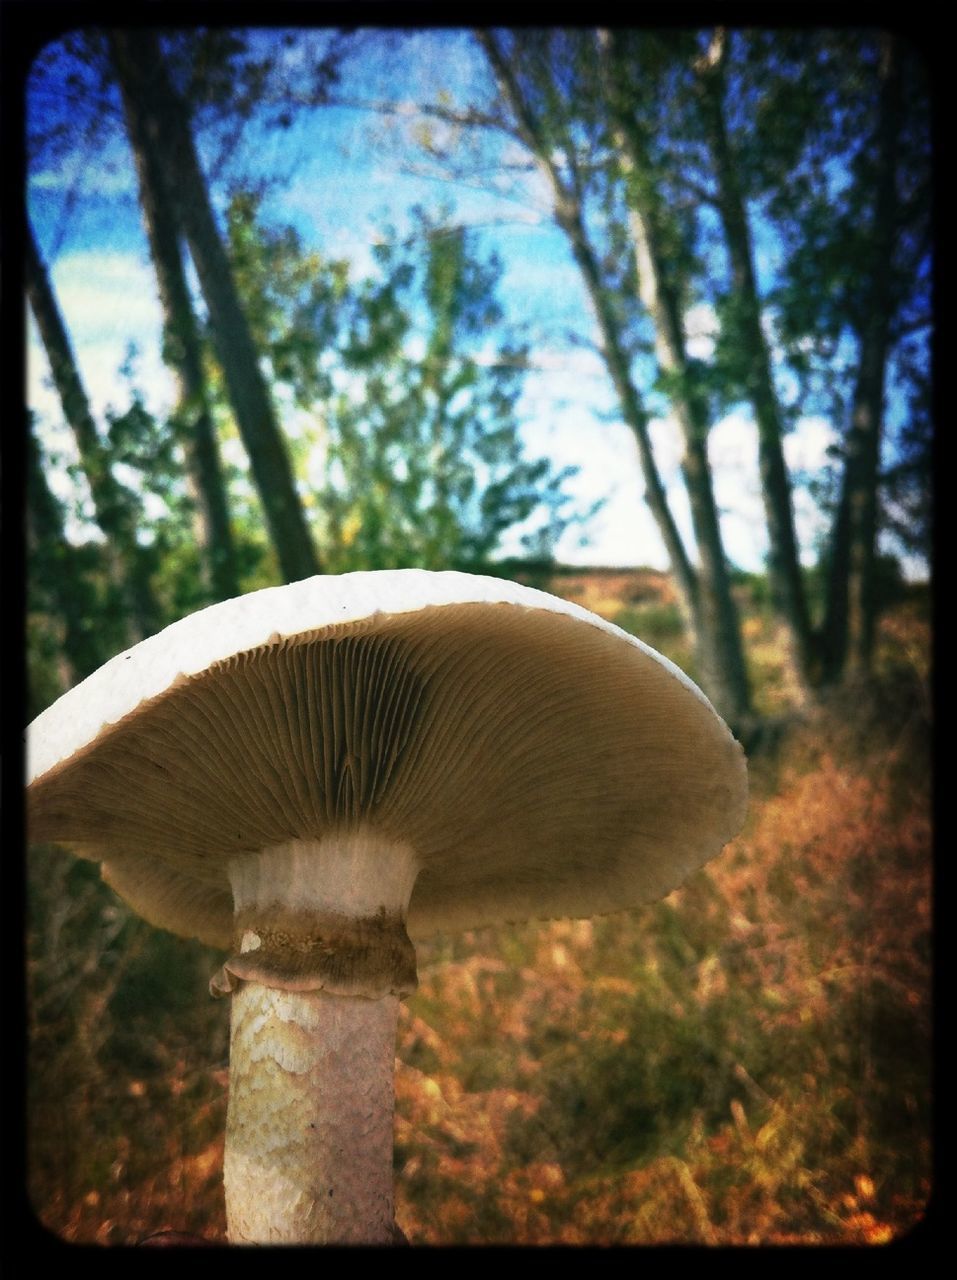 tree, transfer print, mushroom, growth, nature, forest, fungus, auto post production filter, focus on foreground, close-up, beauty in nature, tranquility, tree trunk, field, no people, selective focus, day, outdoors, toadstool, sunlight